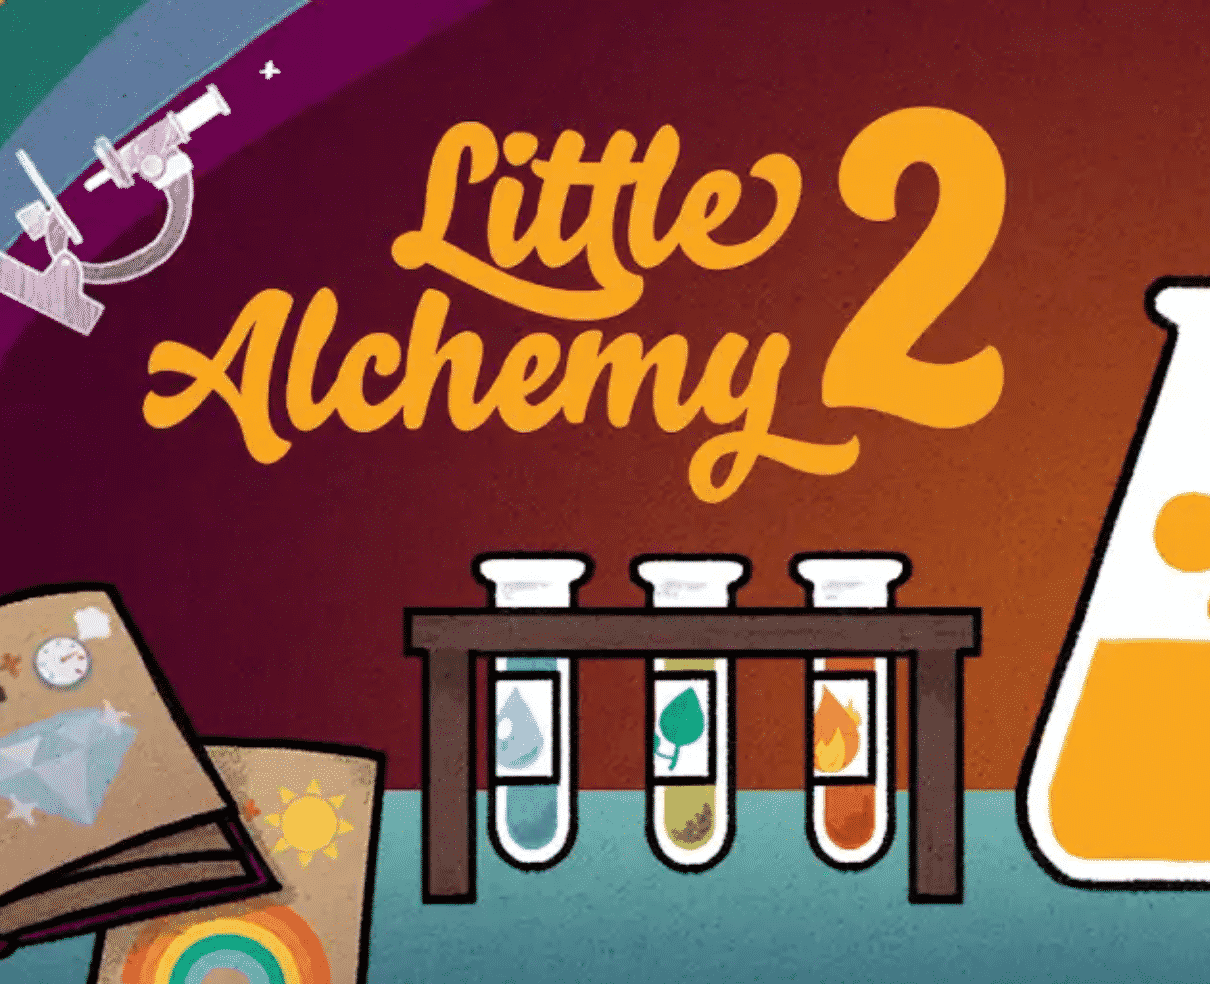 How to make time in Little Alchemy 2